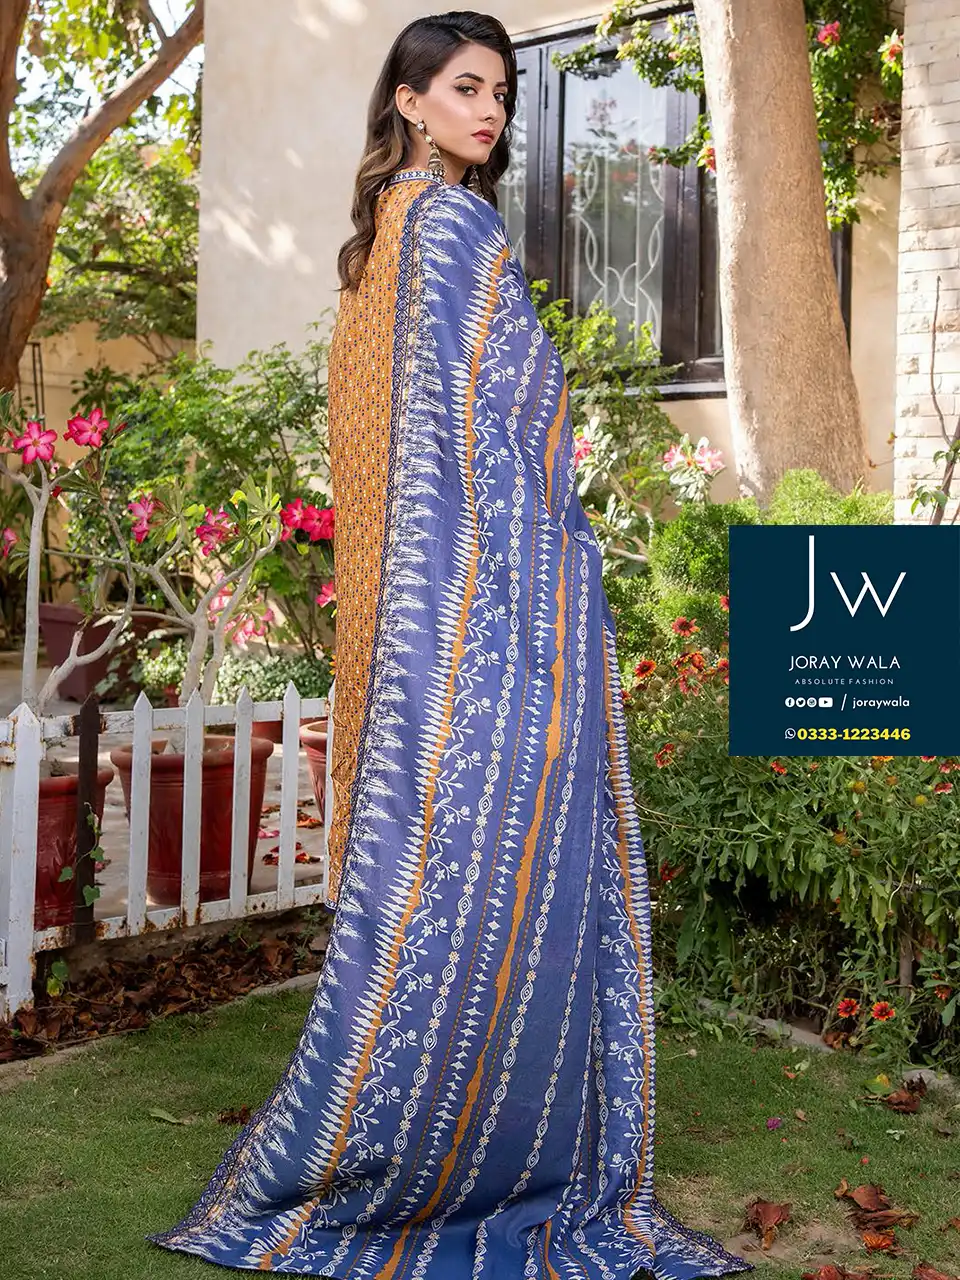 Zesh Cutwork Embroidered Lawn 2024 D6 by Zesh Textile available with free delivery at joraywala